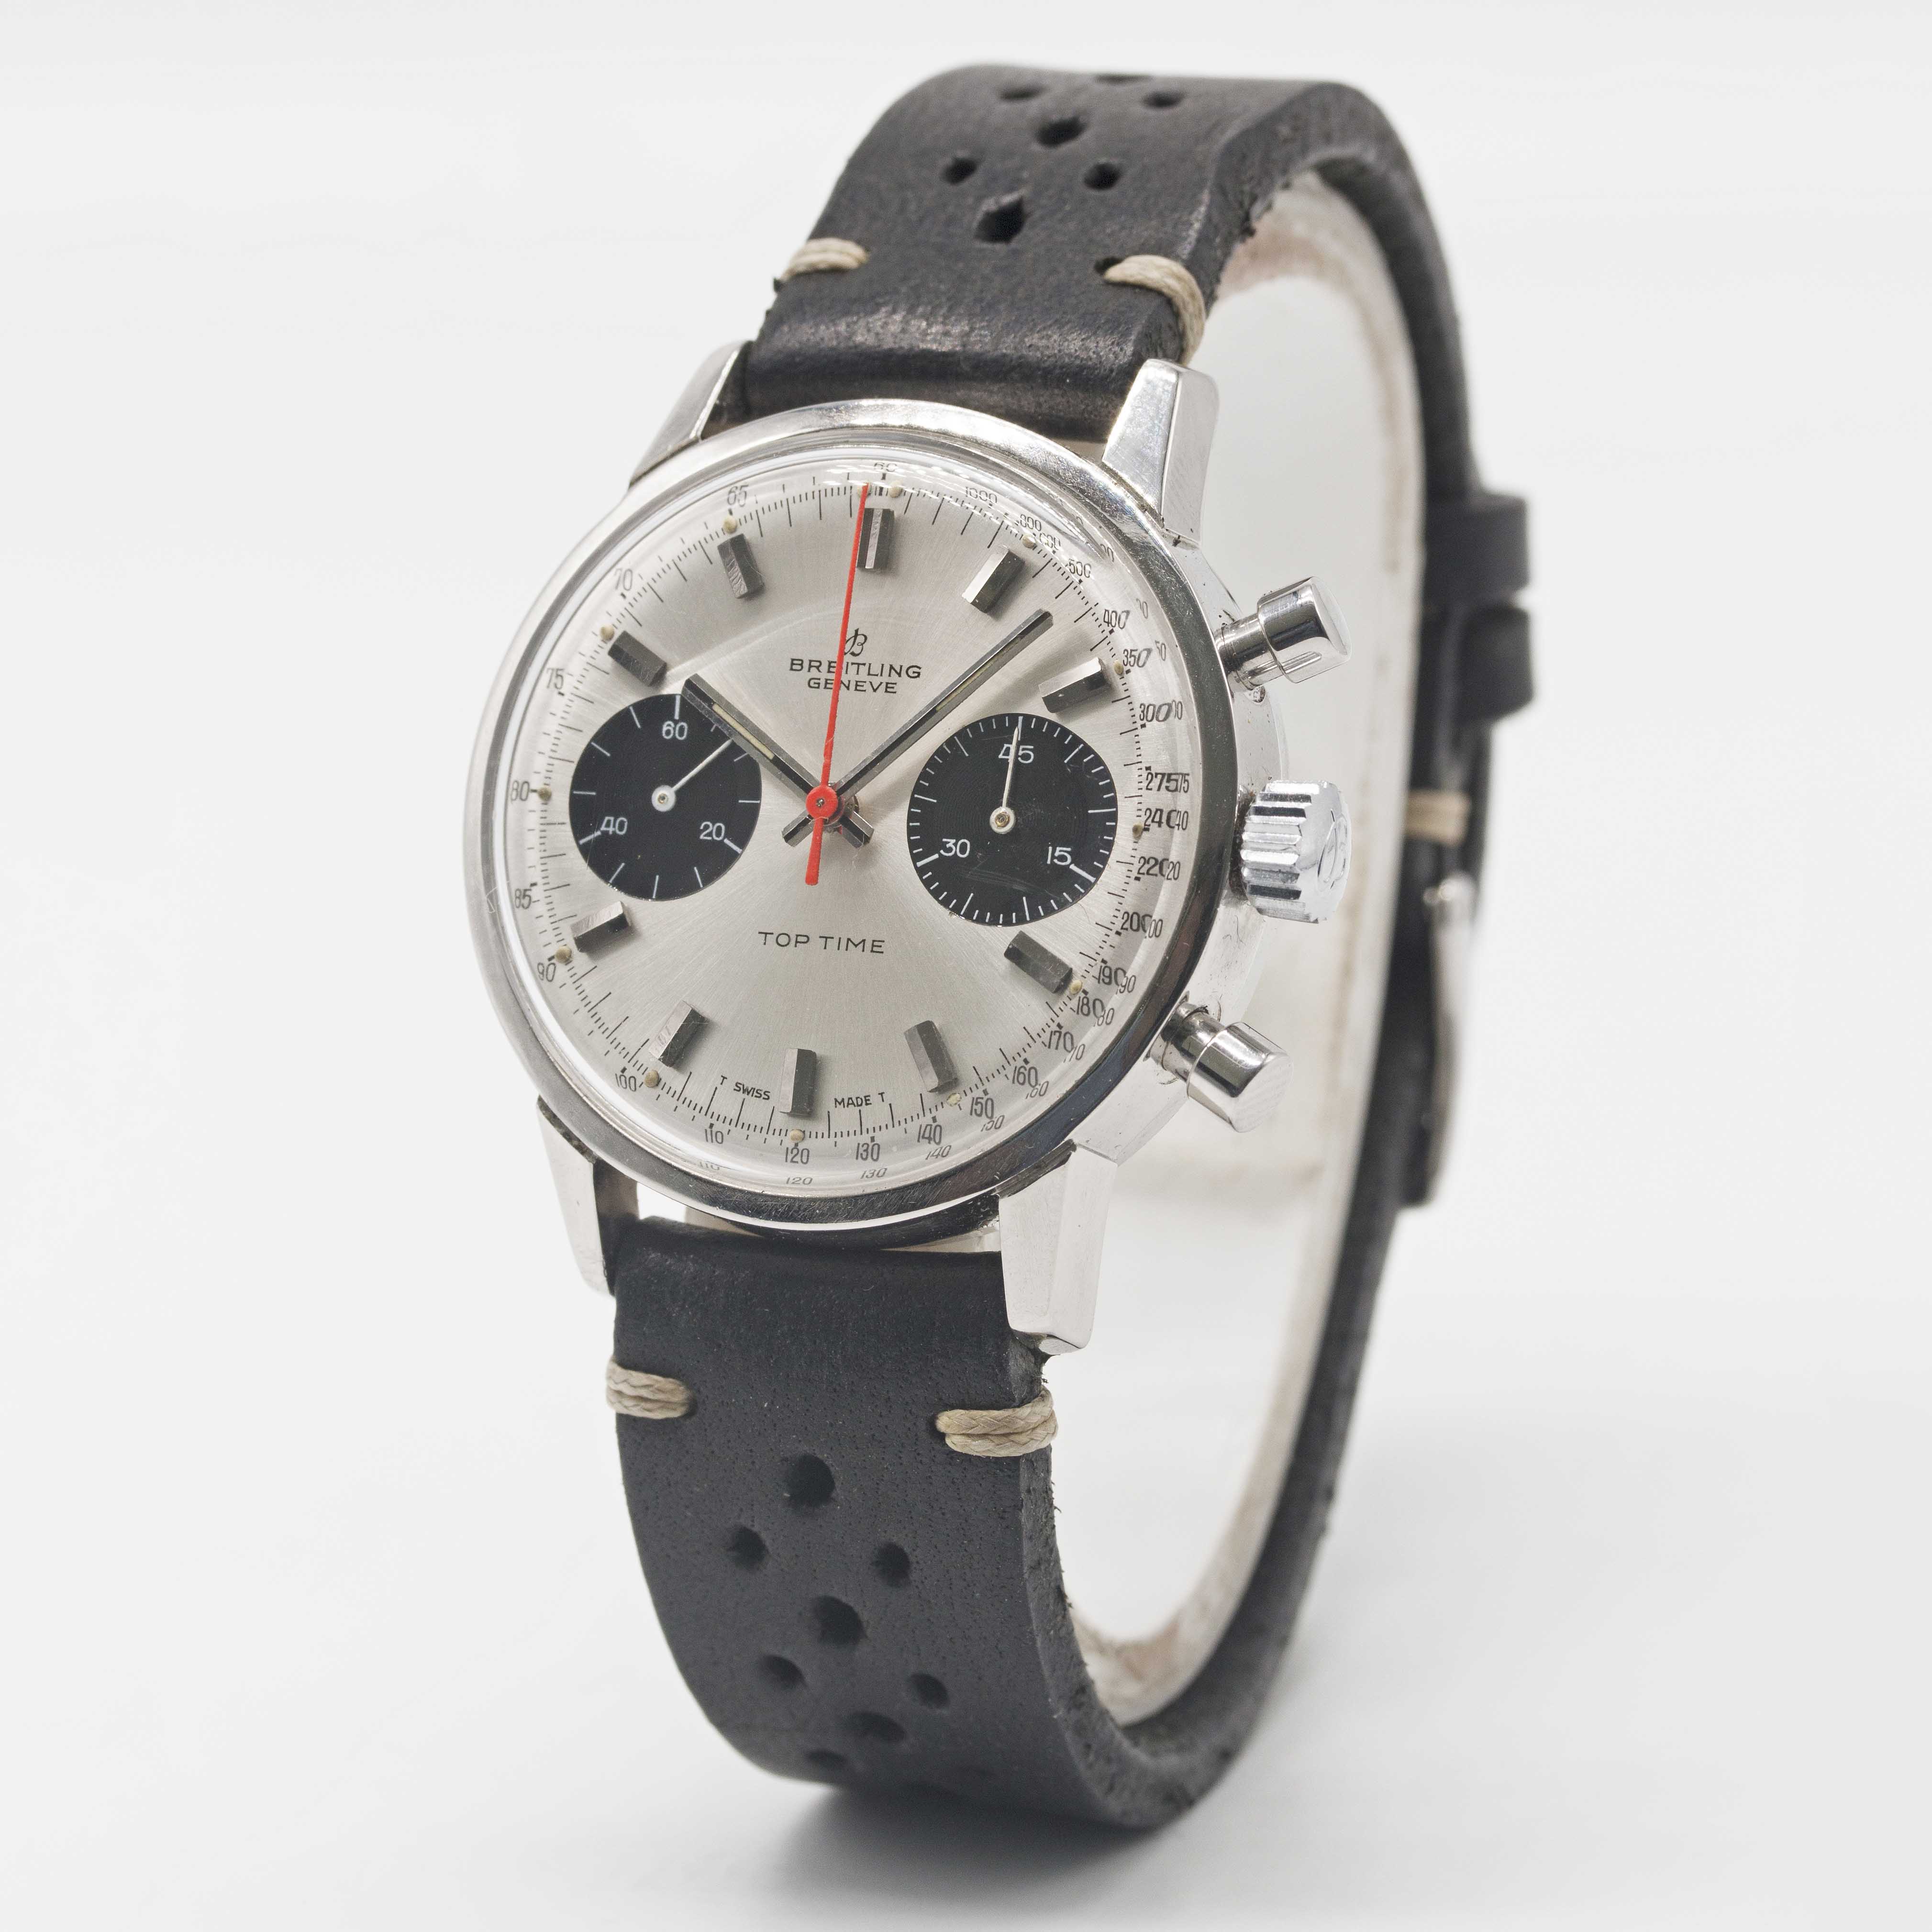 A GENTLEMAN'S STAINLESS STEEL BREITLING TOP TIME CHRONOGRAPH WRIST WATCH CIRCA 1969, REF. 2002-33 - Image 4 of 9